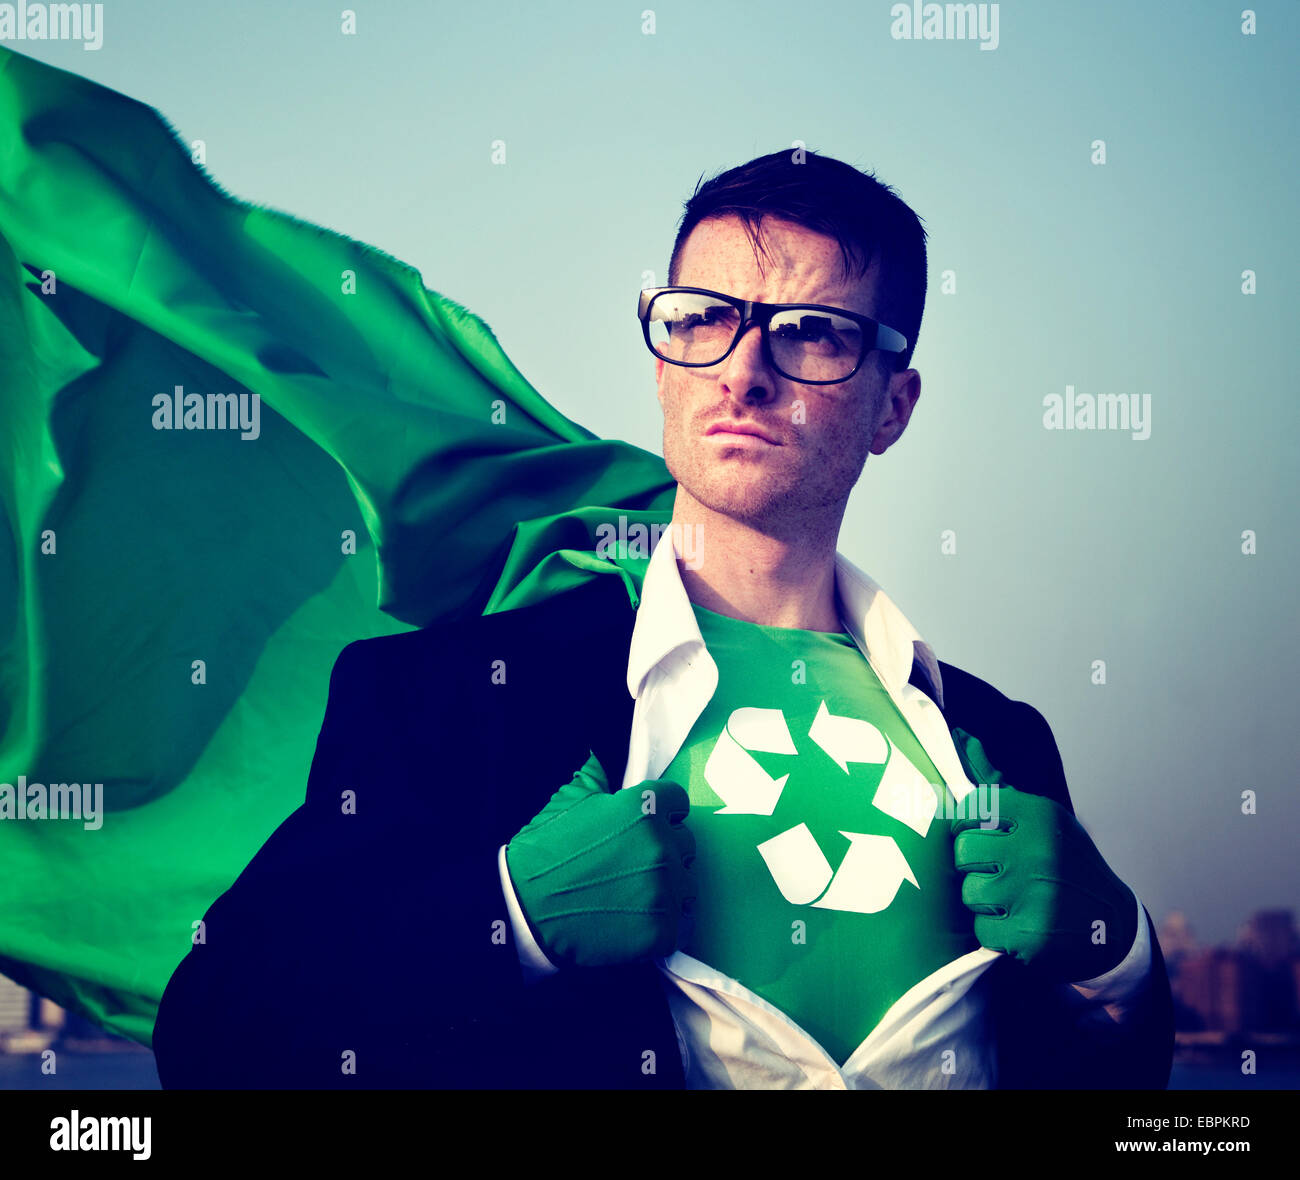 Superhero With Recycling Symbol on Outfit Stock Photo